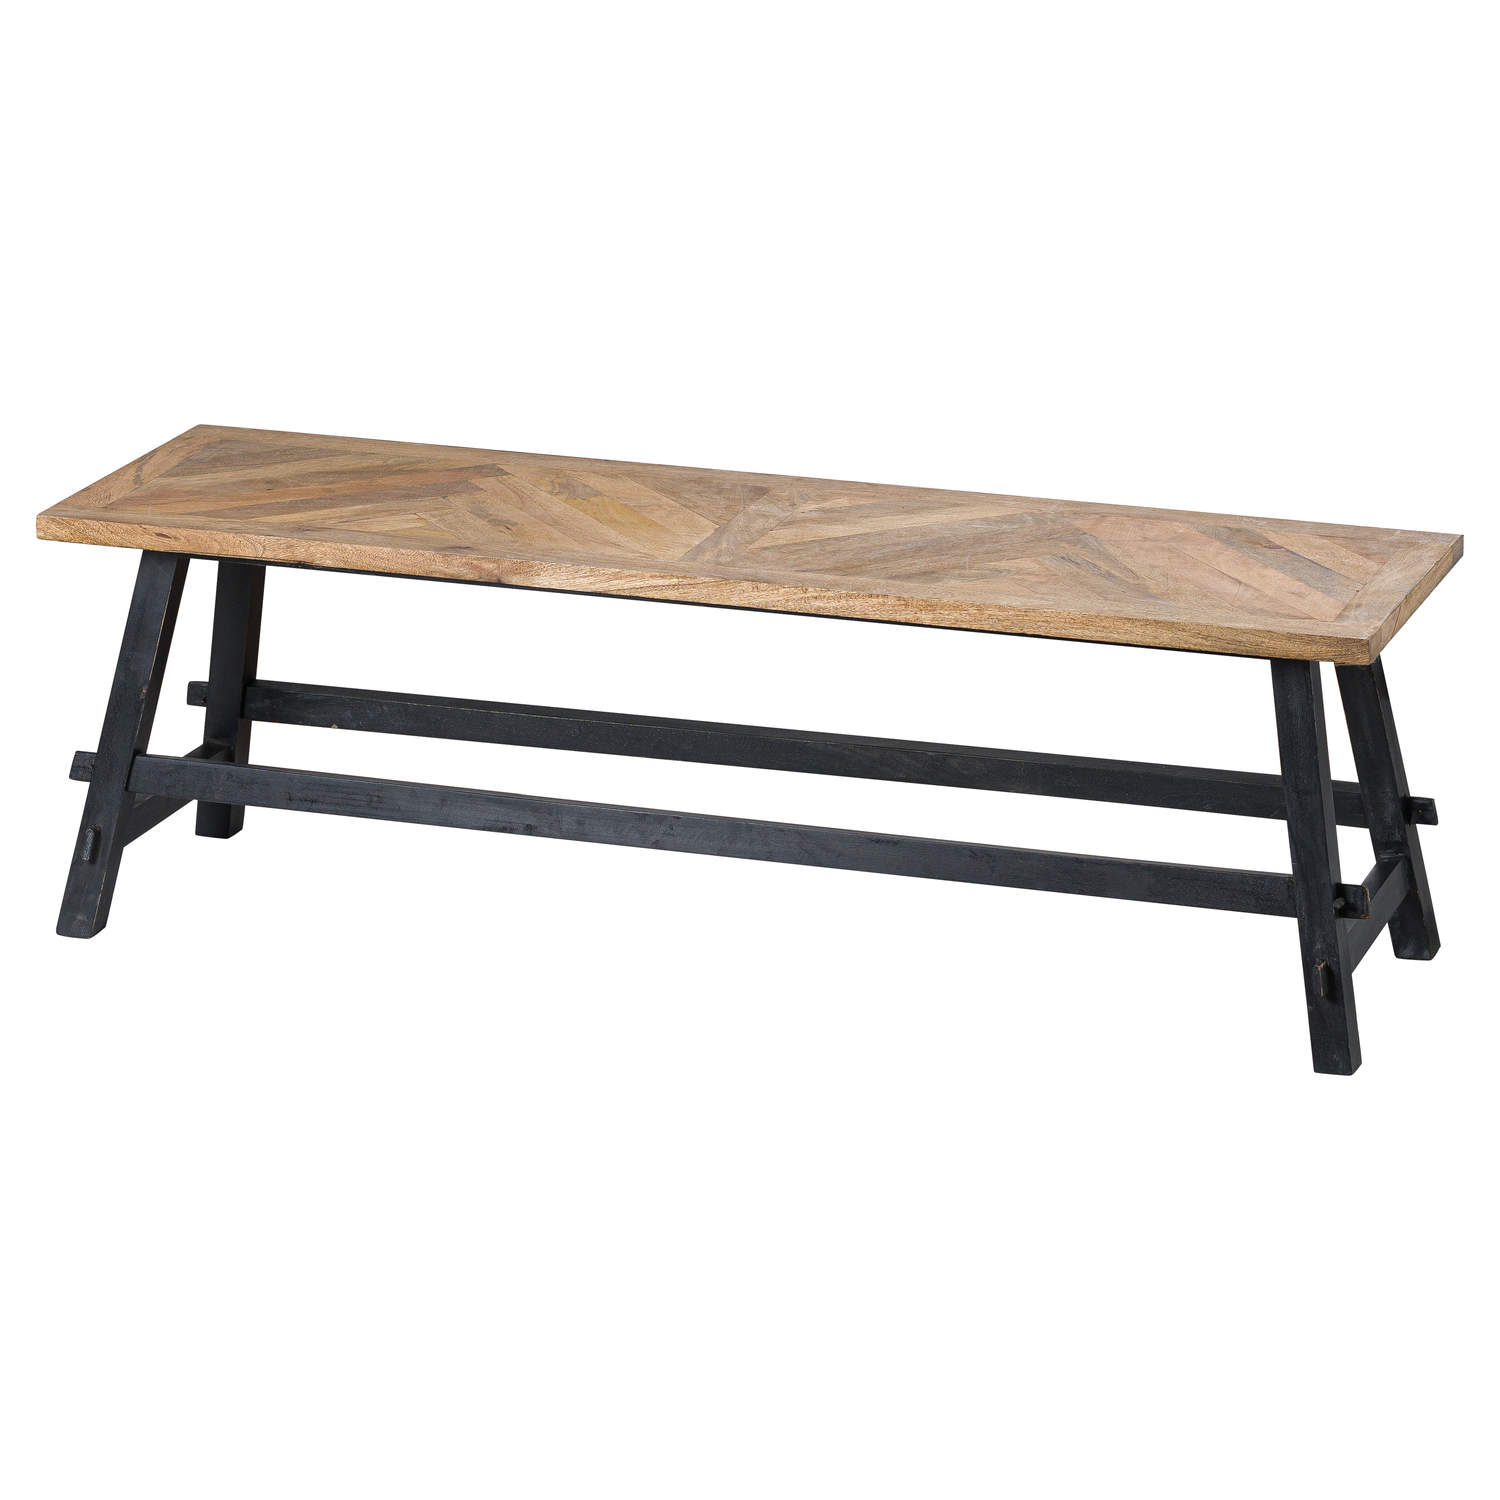 Nordic Collection Dining Table Bench - Image 1